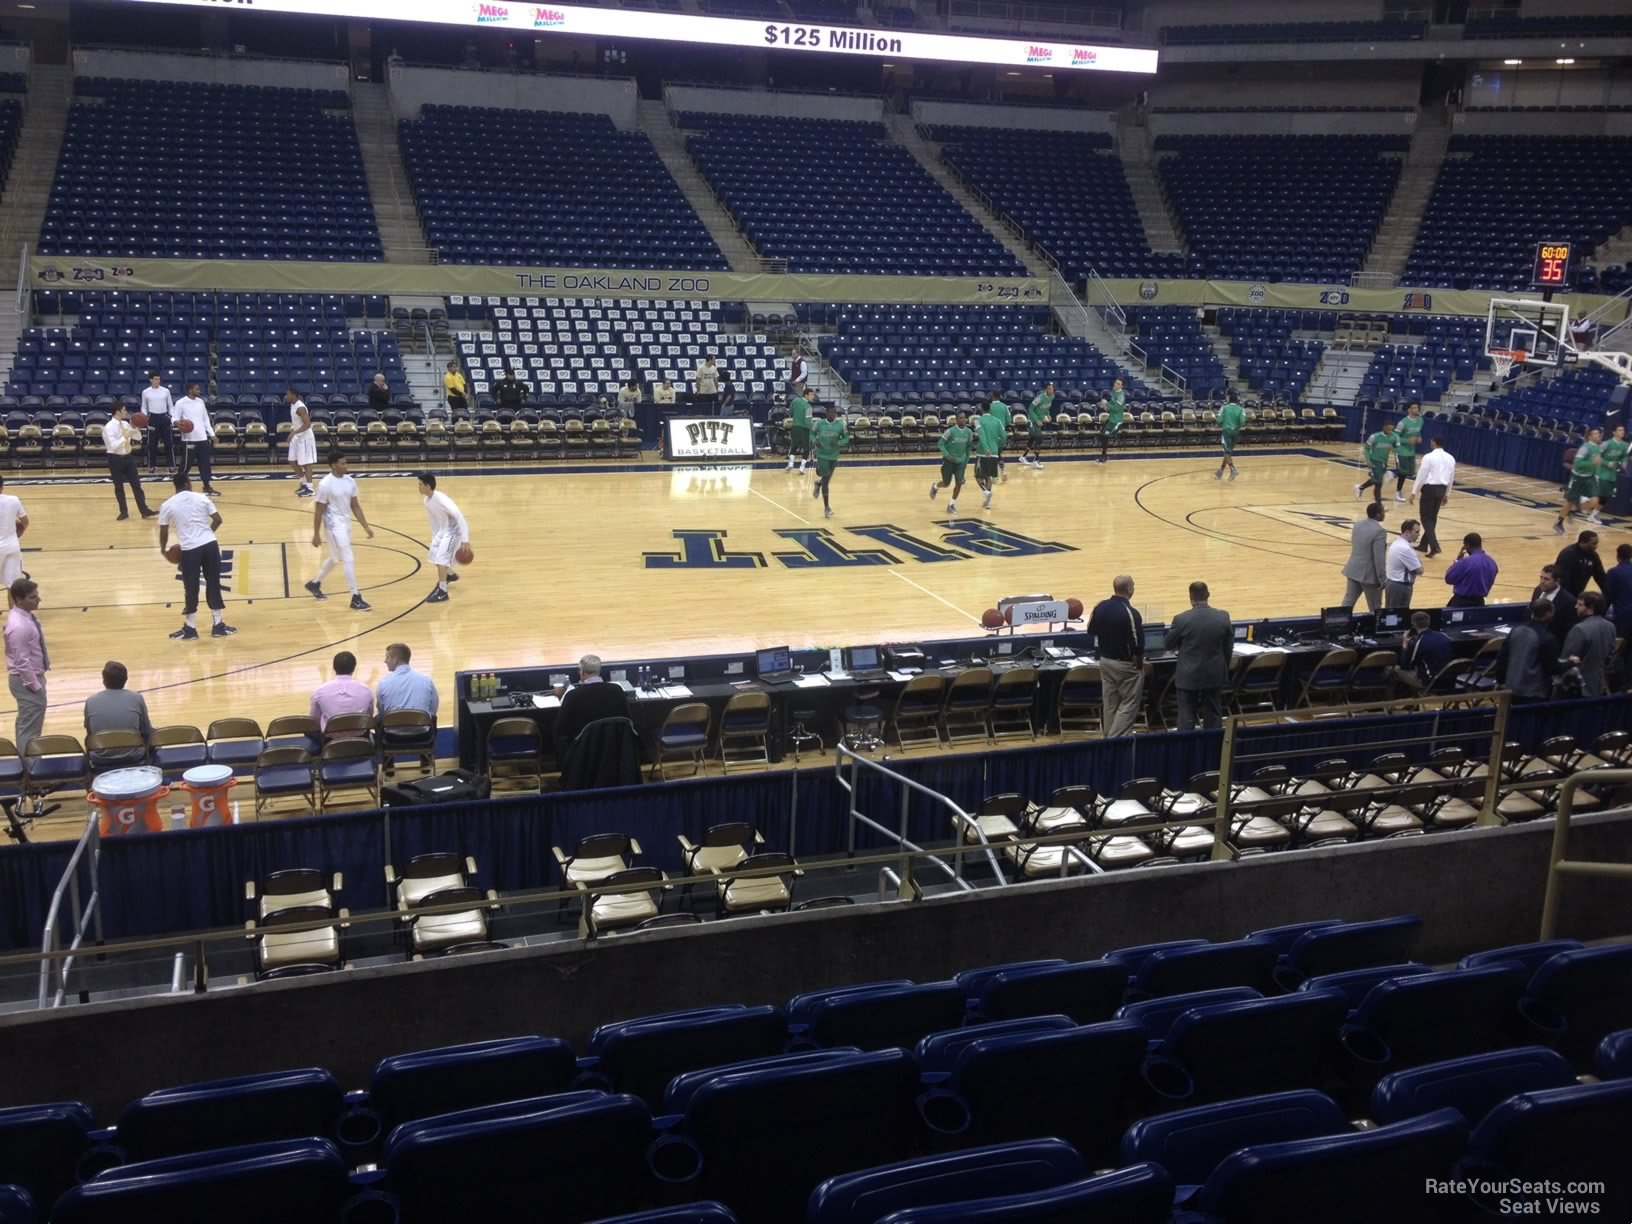 section 122, row h seat view  - petersen events center